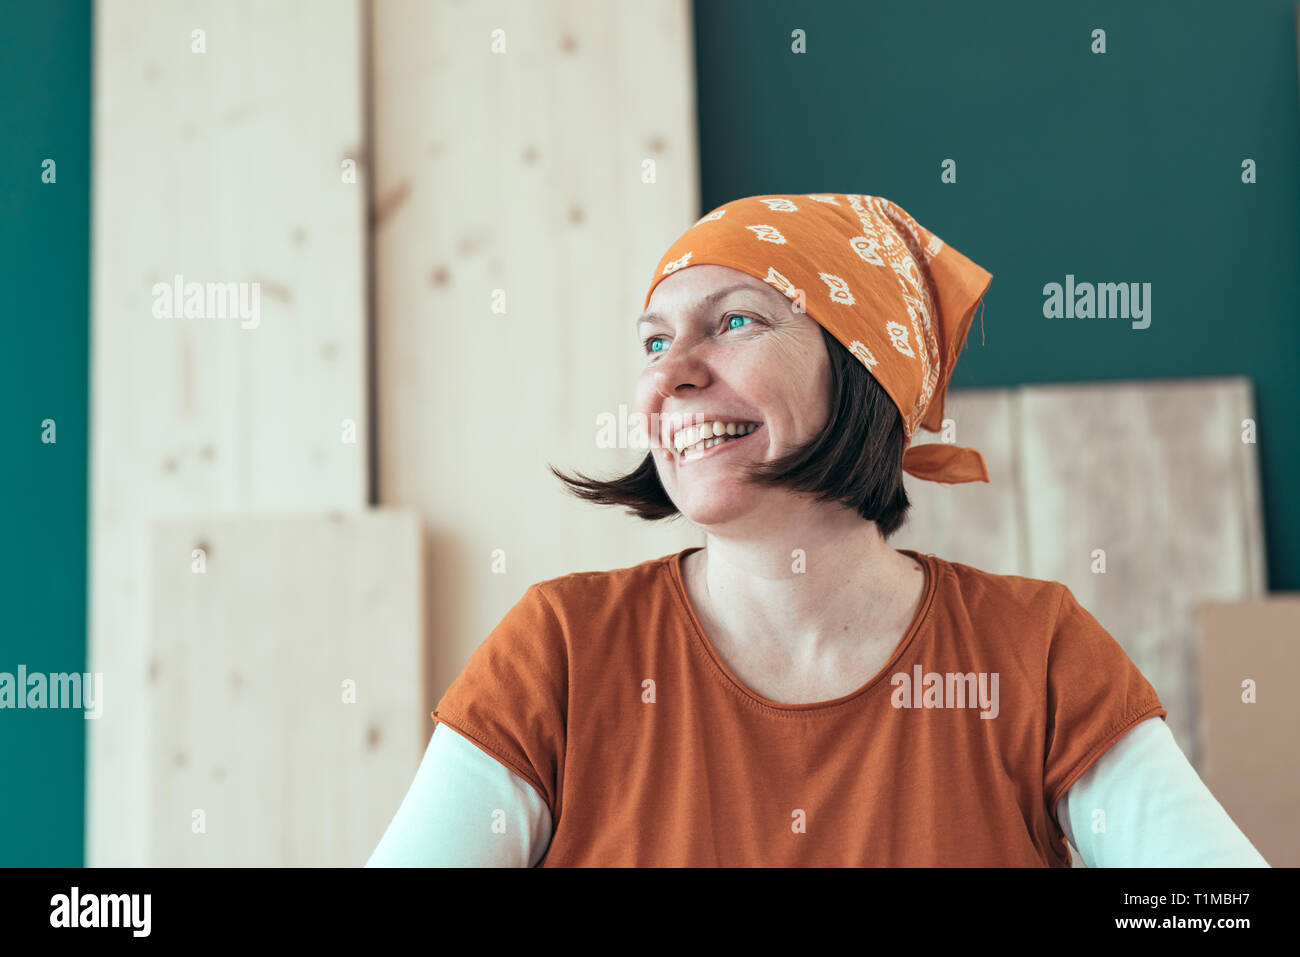 Portrait of smiling happy female carpenter wearing headscarf bandana in small business woodwork workshop Stock Photo